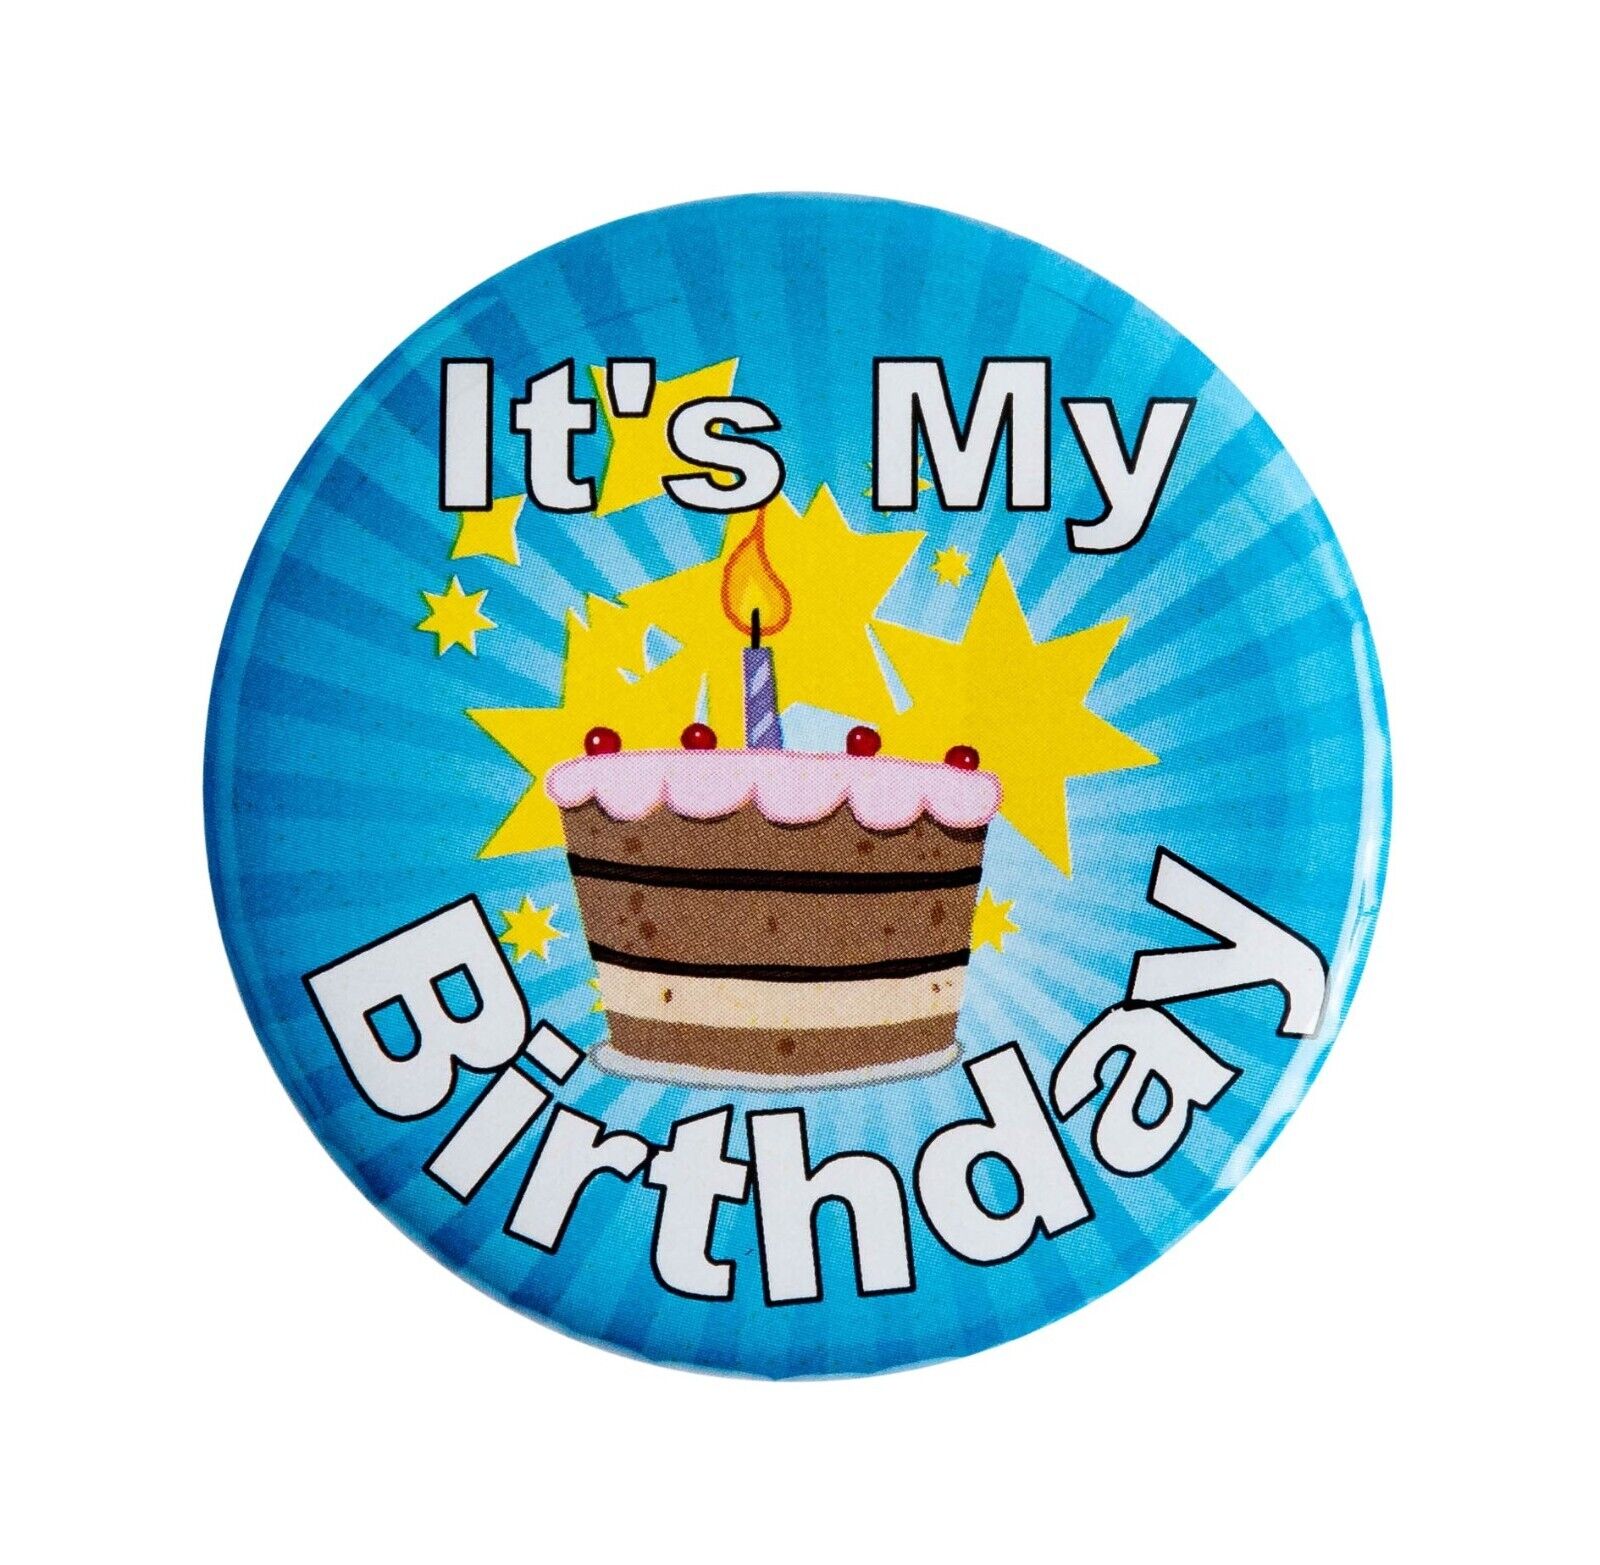 It's my Birthday Button Handmade in USA Clothing Magnet no holes